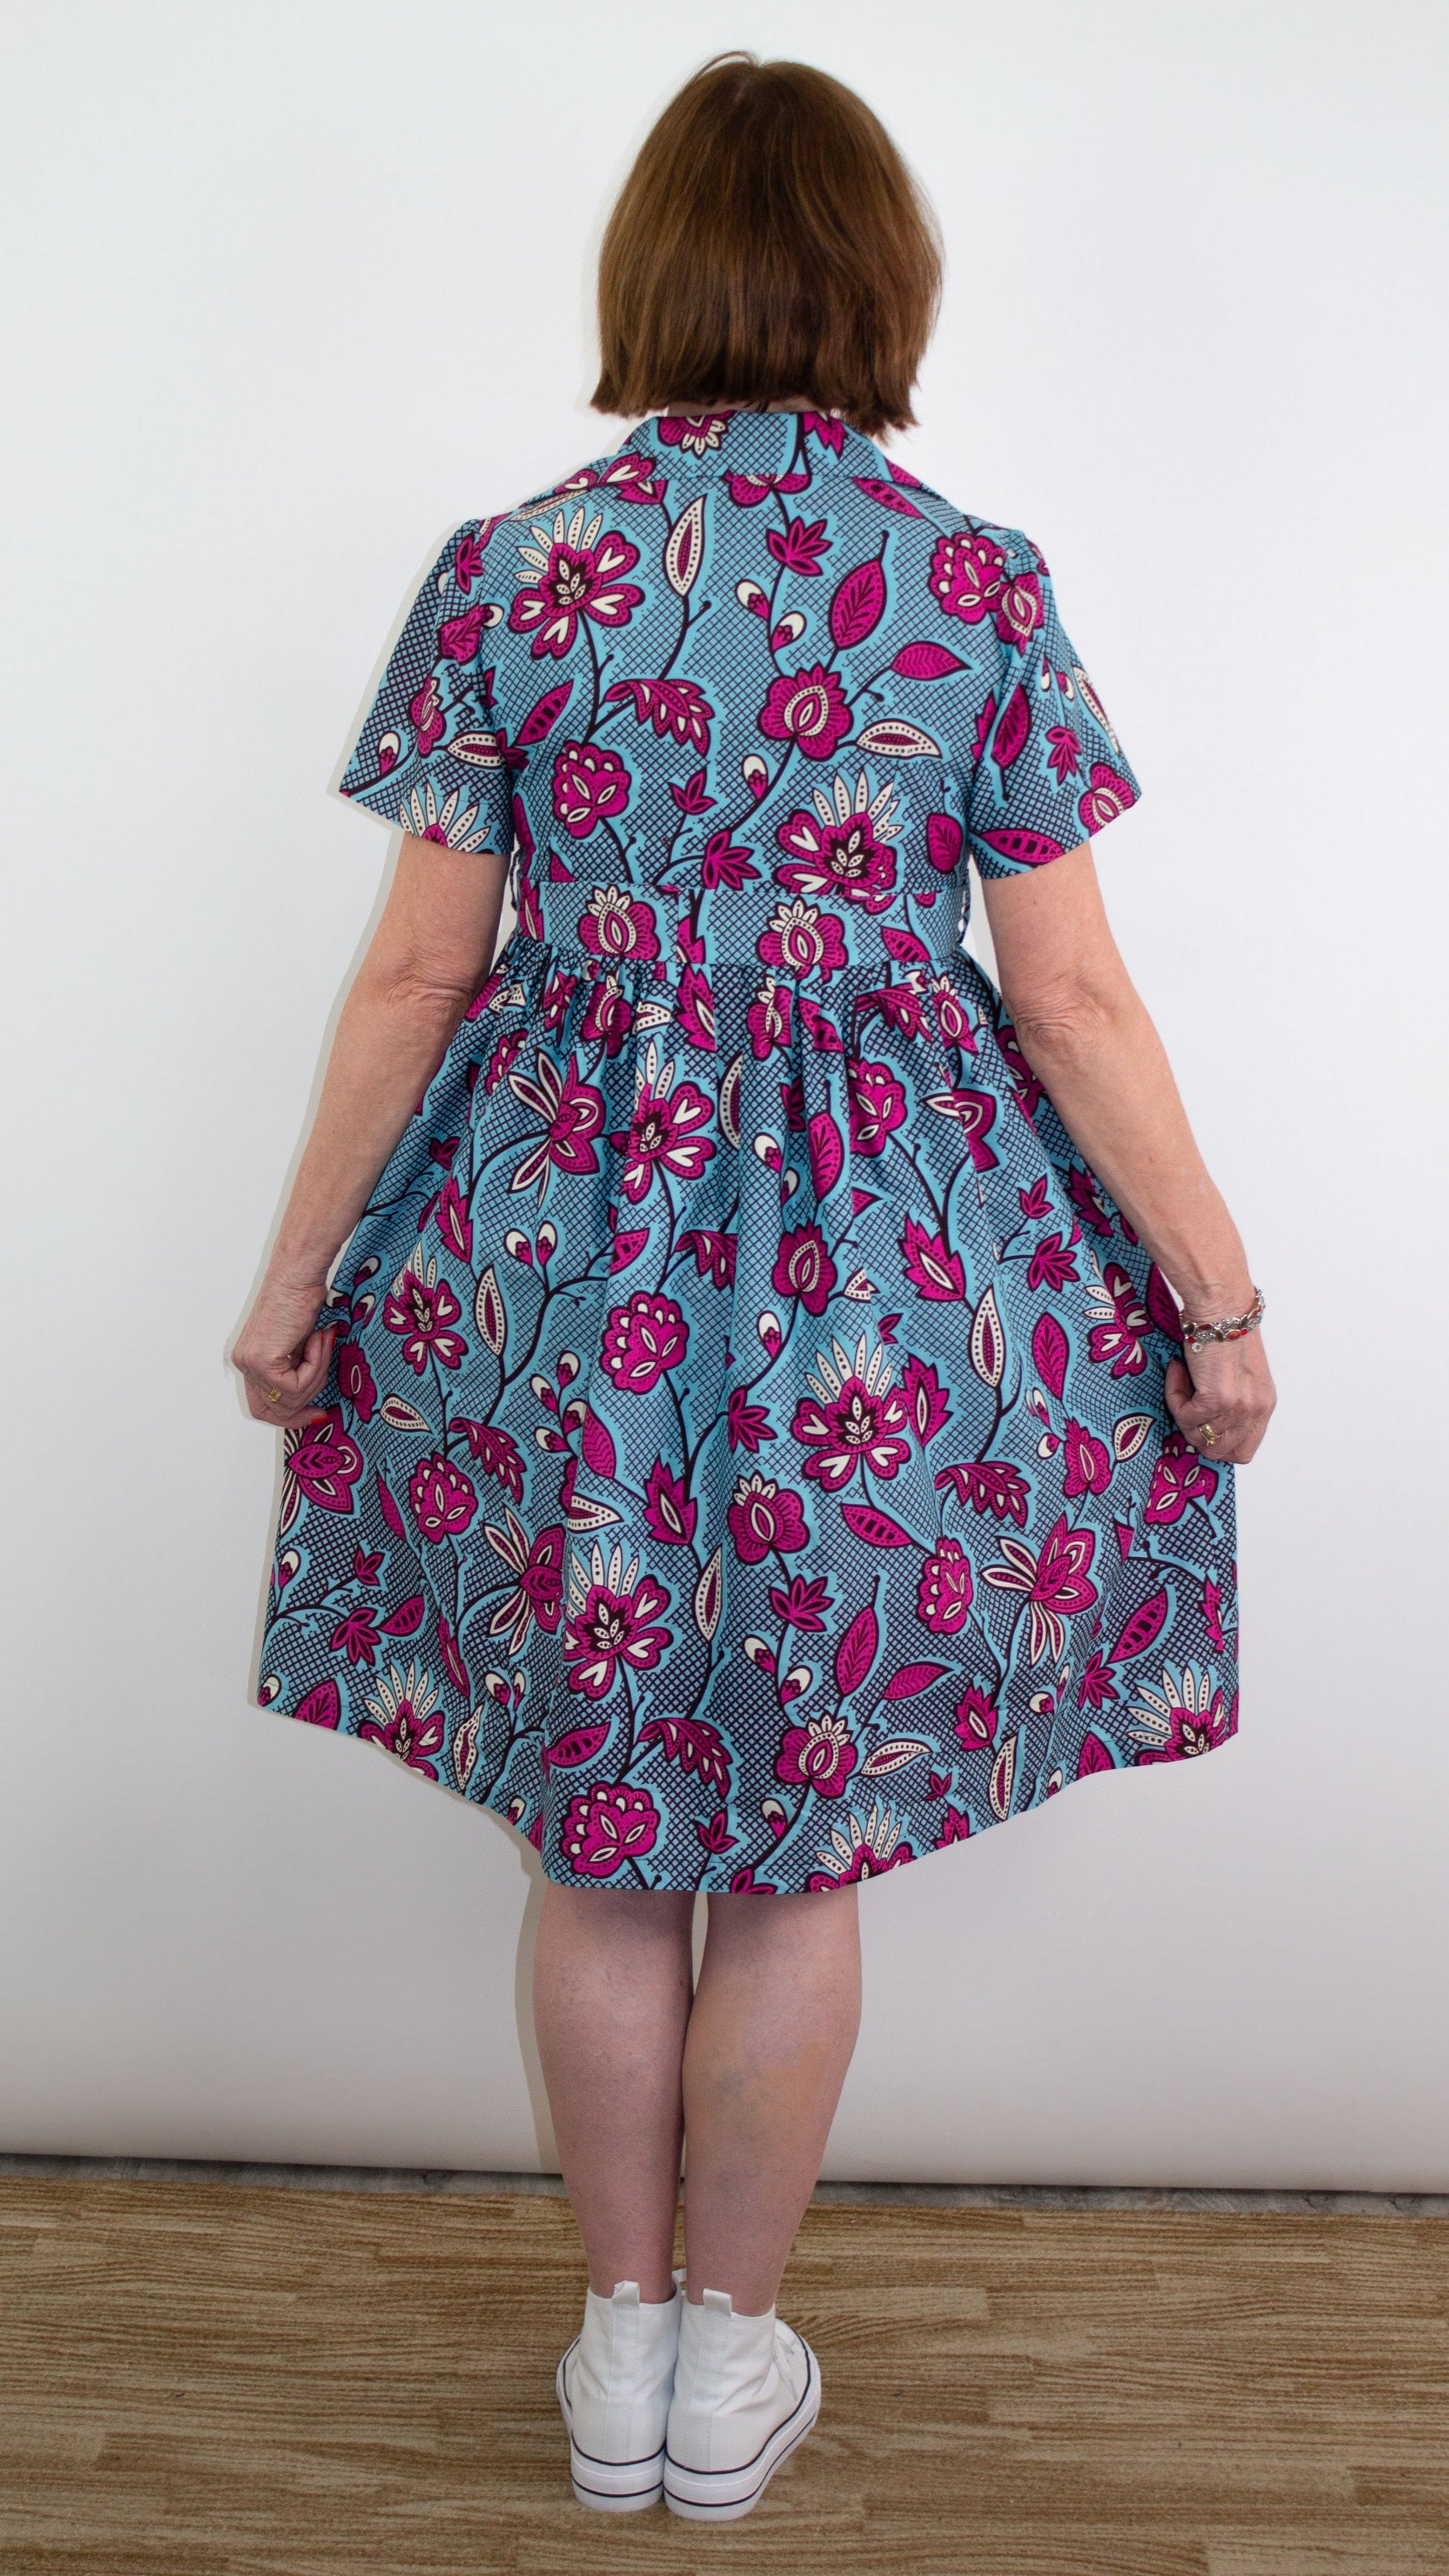 A model with short hair showcasing the back of a blue print dress with pink floral elements paired with white sneakers and a colourful bracelet.